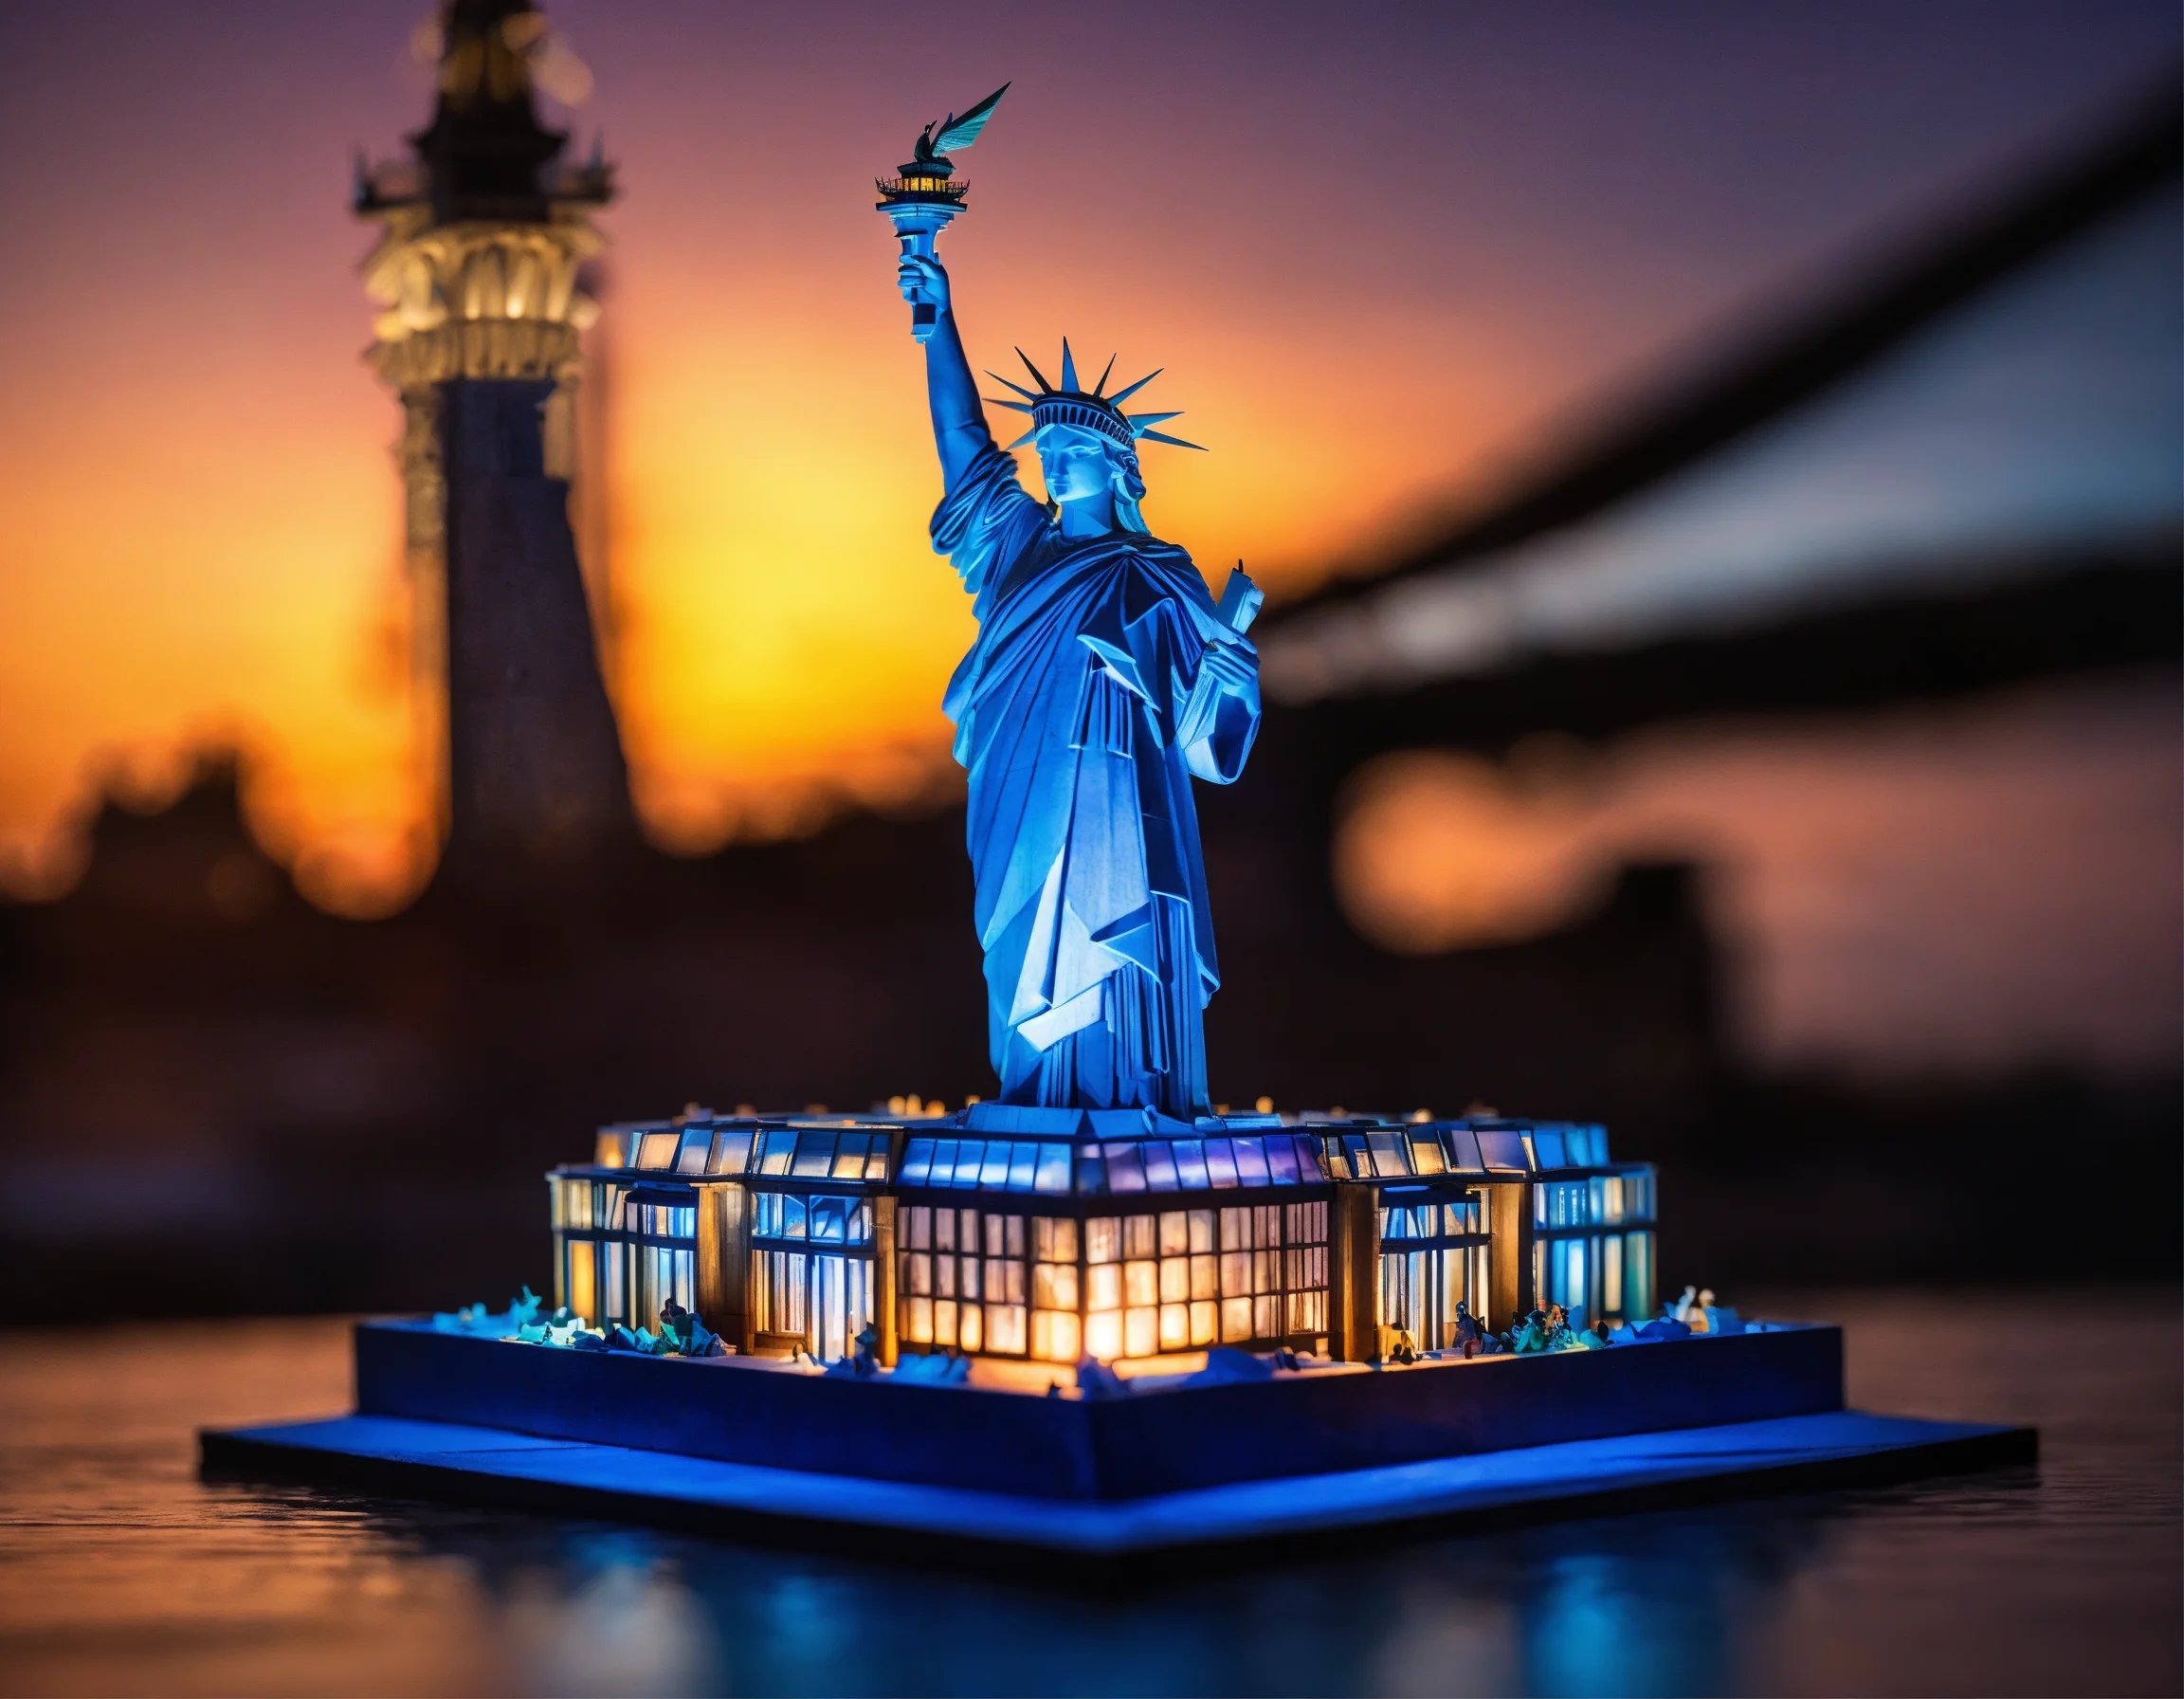 The Statue of Liberty after sunset at the blue hou.jpg